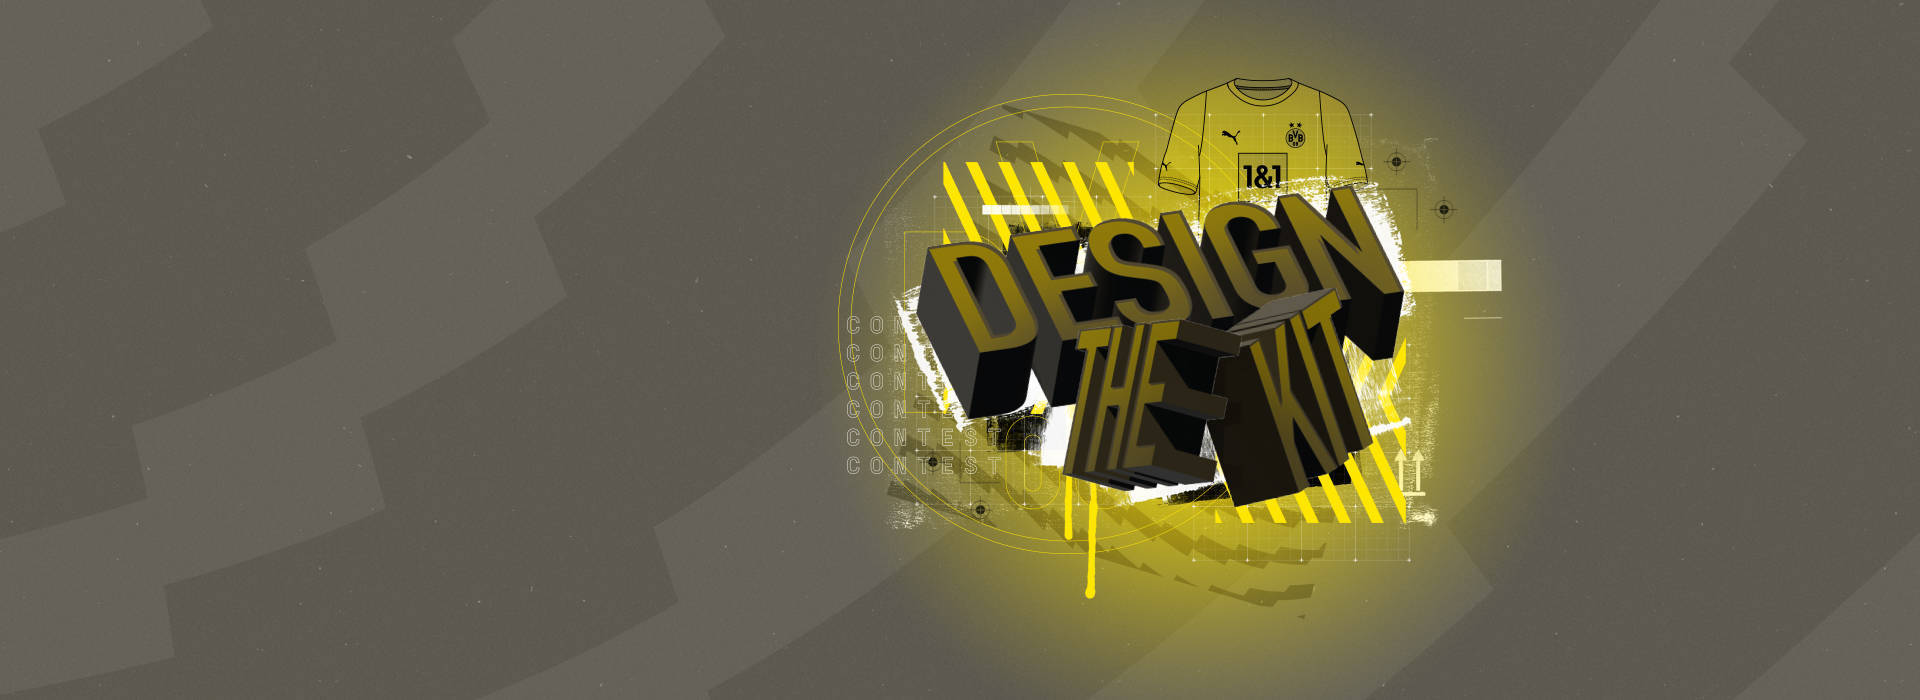  Design the Home Jersey 